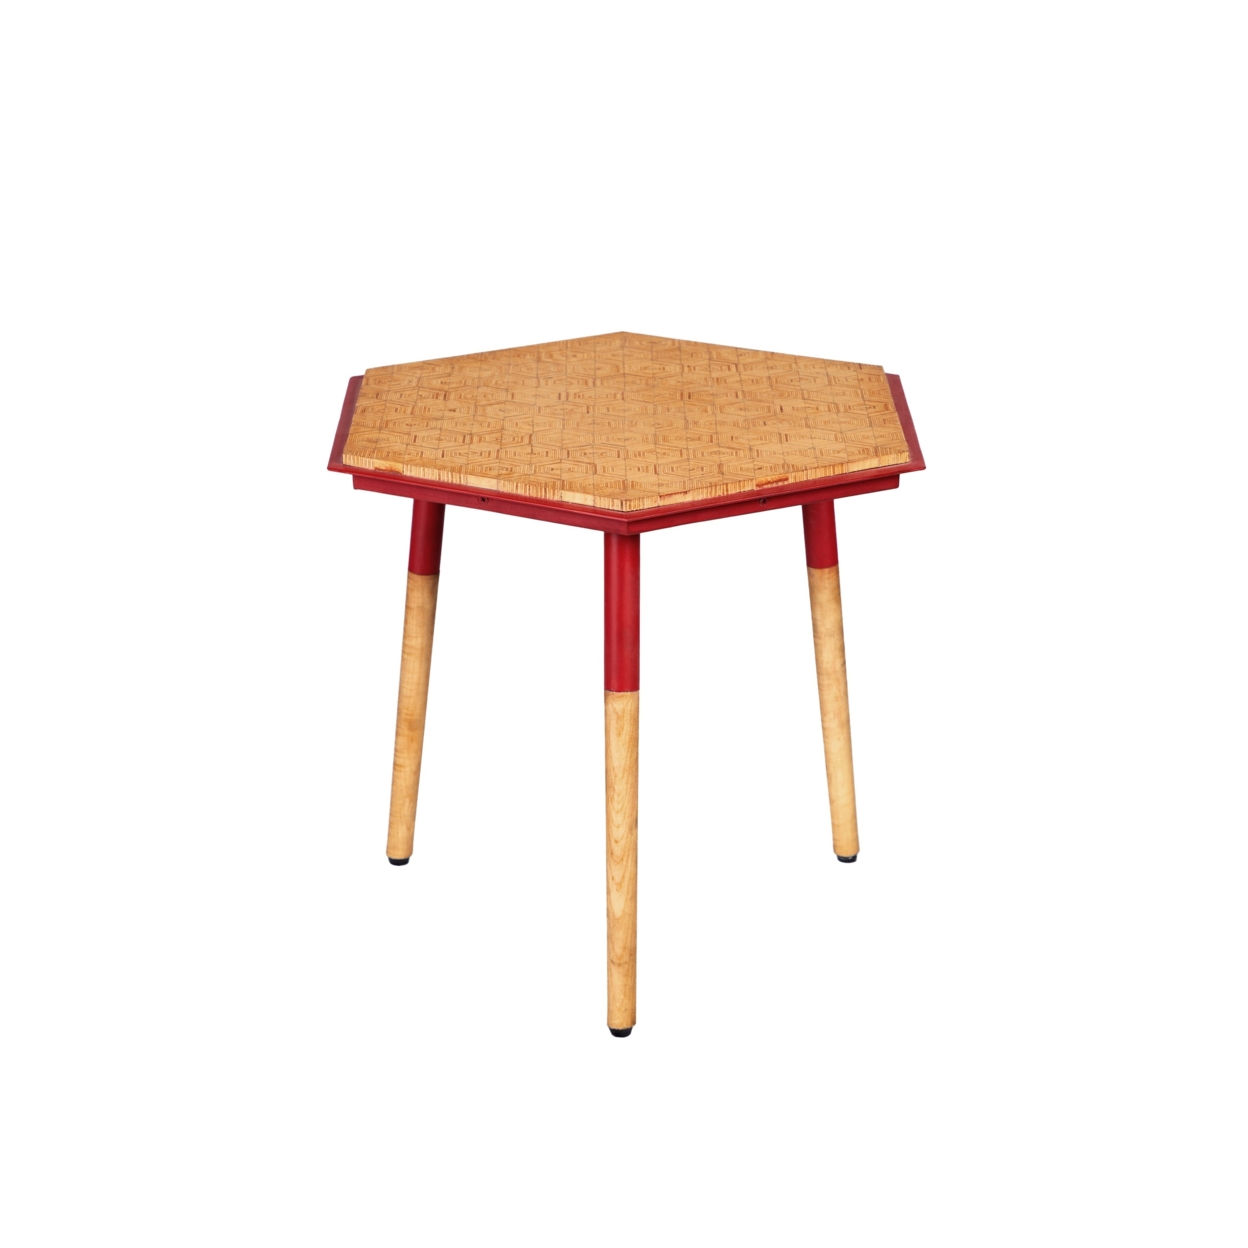 Paige 18 Inch Hexagon Illusion Wood Side Table, Brown, Red- Saltoro Sherpi